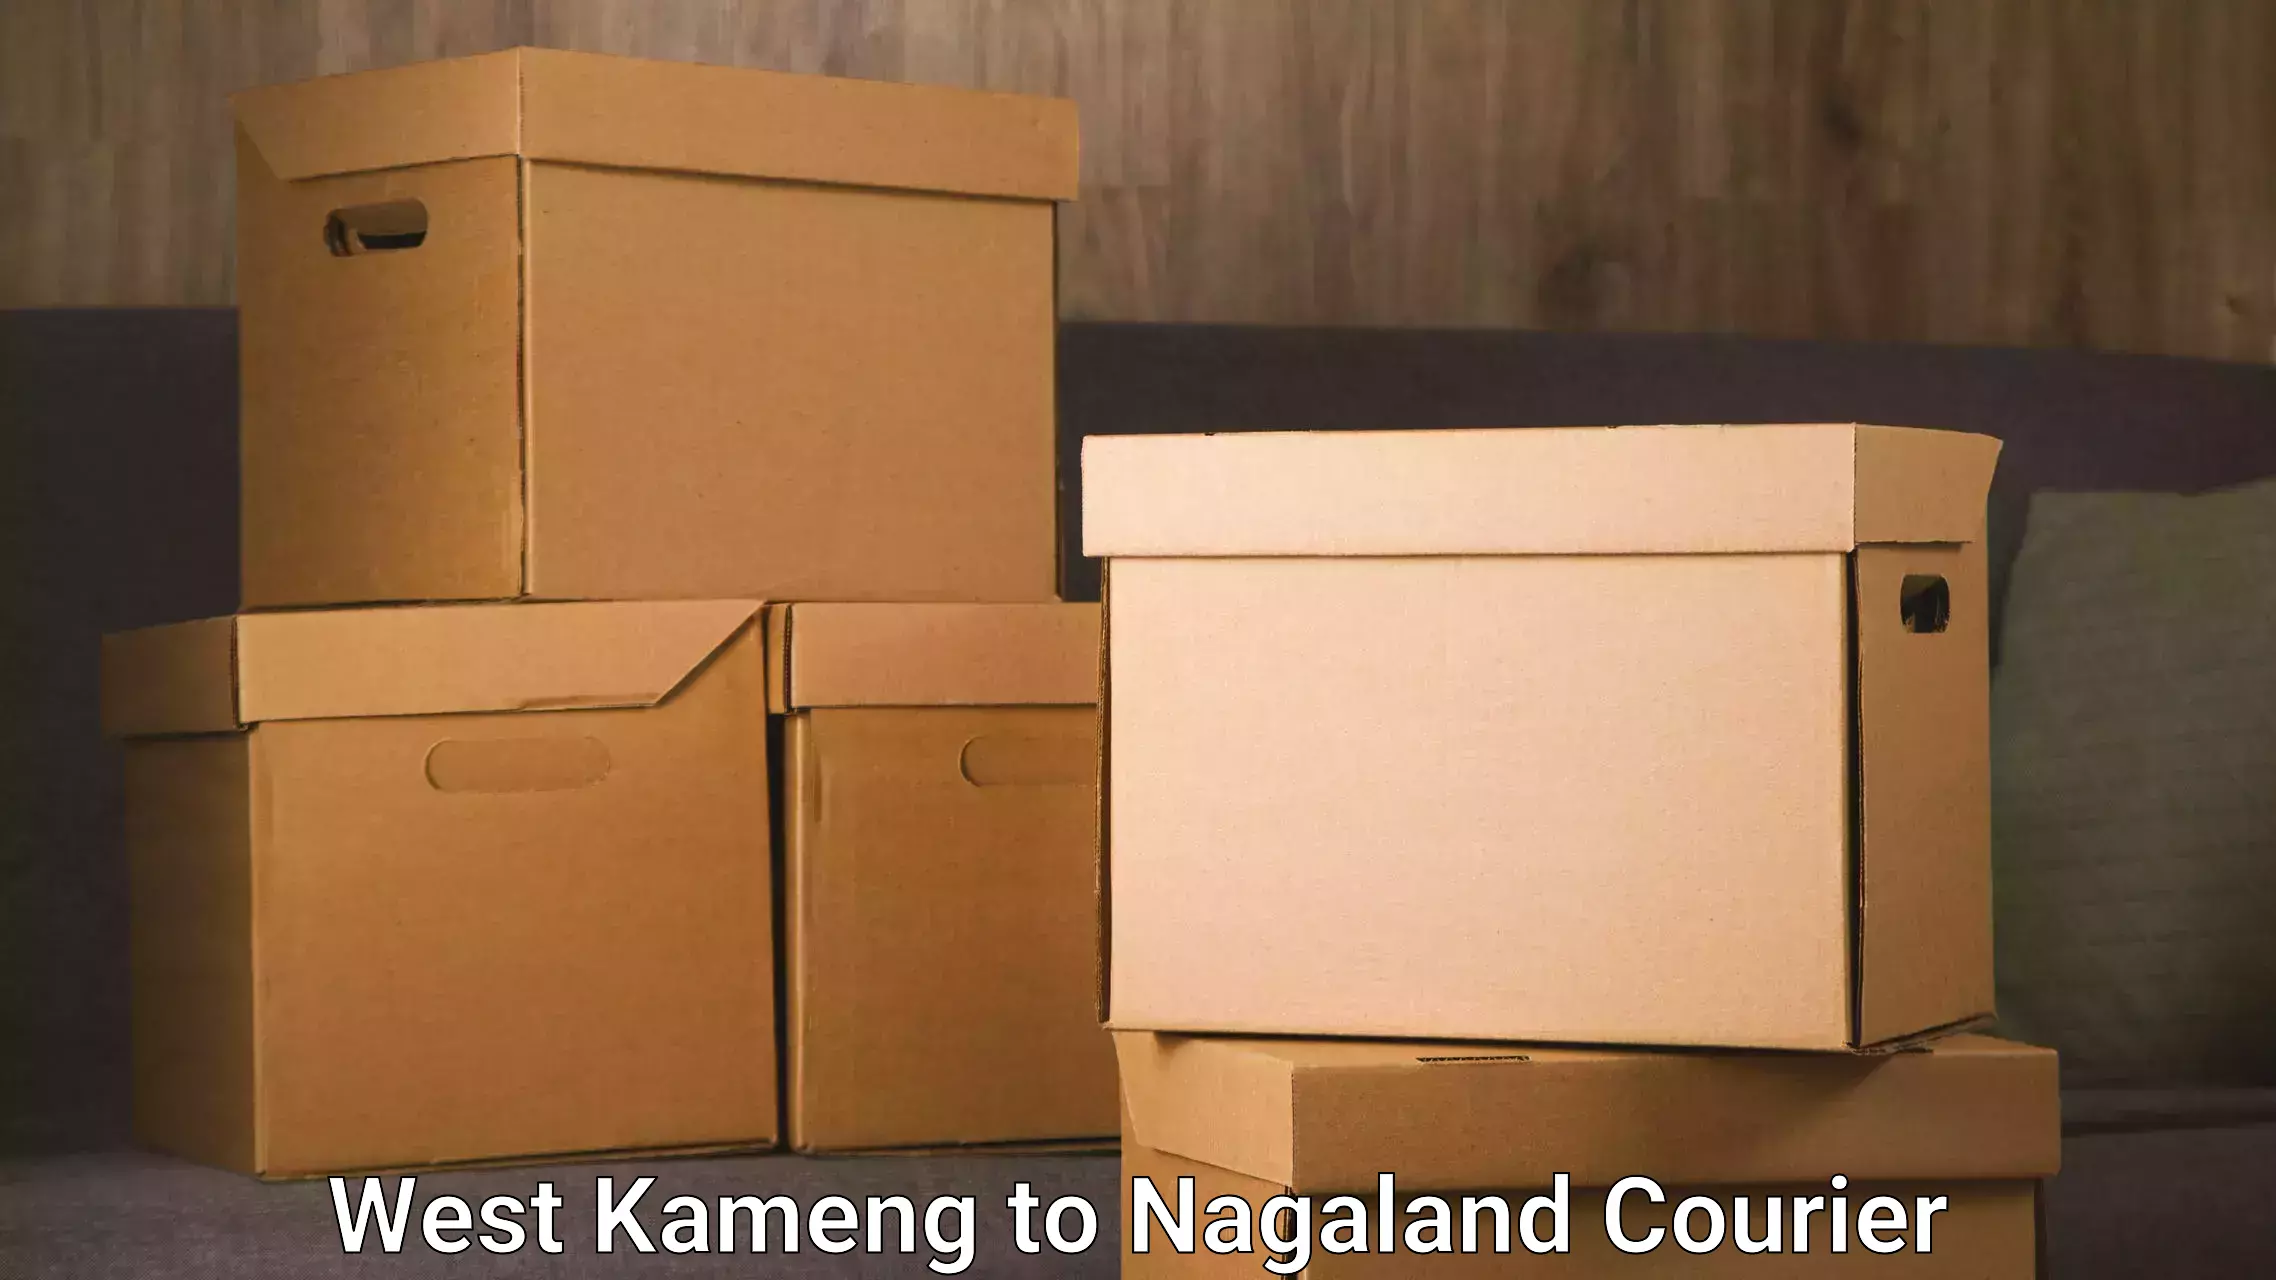 Tech-enabled shipping West Kameng to Nagaland